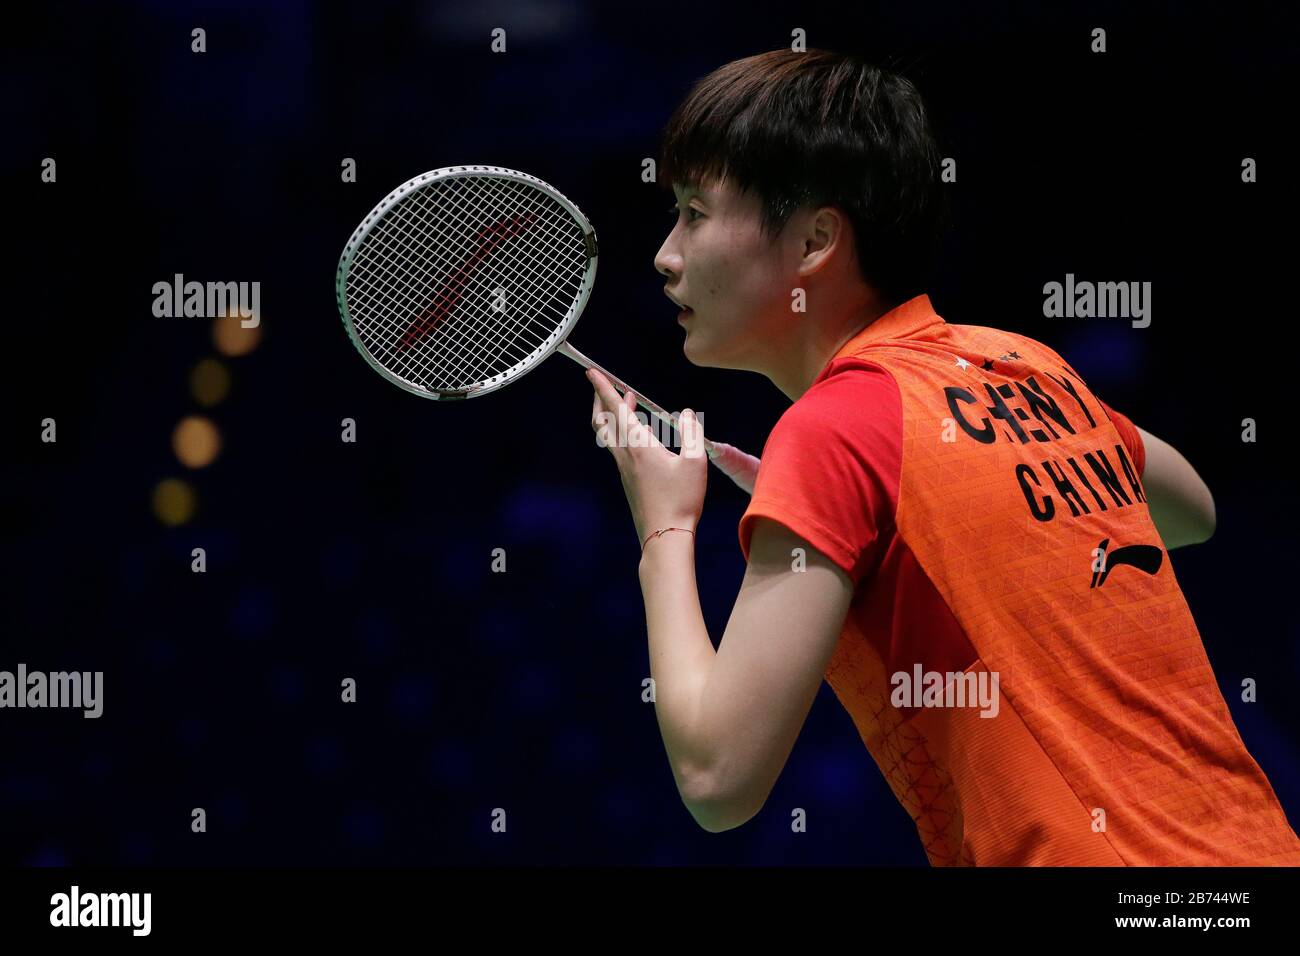 Birmingham, Britain. 13th Mar, 2020. China's Chen Yufei competes during the women's singles quarterfinal match with Thailand's Ratchanok Intanon at the All England Open Badminton Championships in Birmingham, Britain, March 13, 2020. Credit: Tim Ireland/Xinhua/Alamy Live News Stock Photo